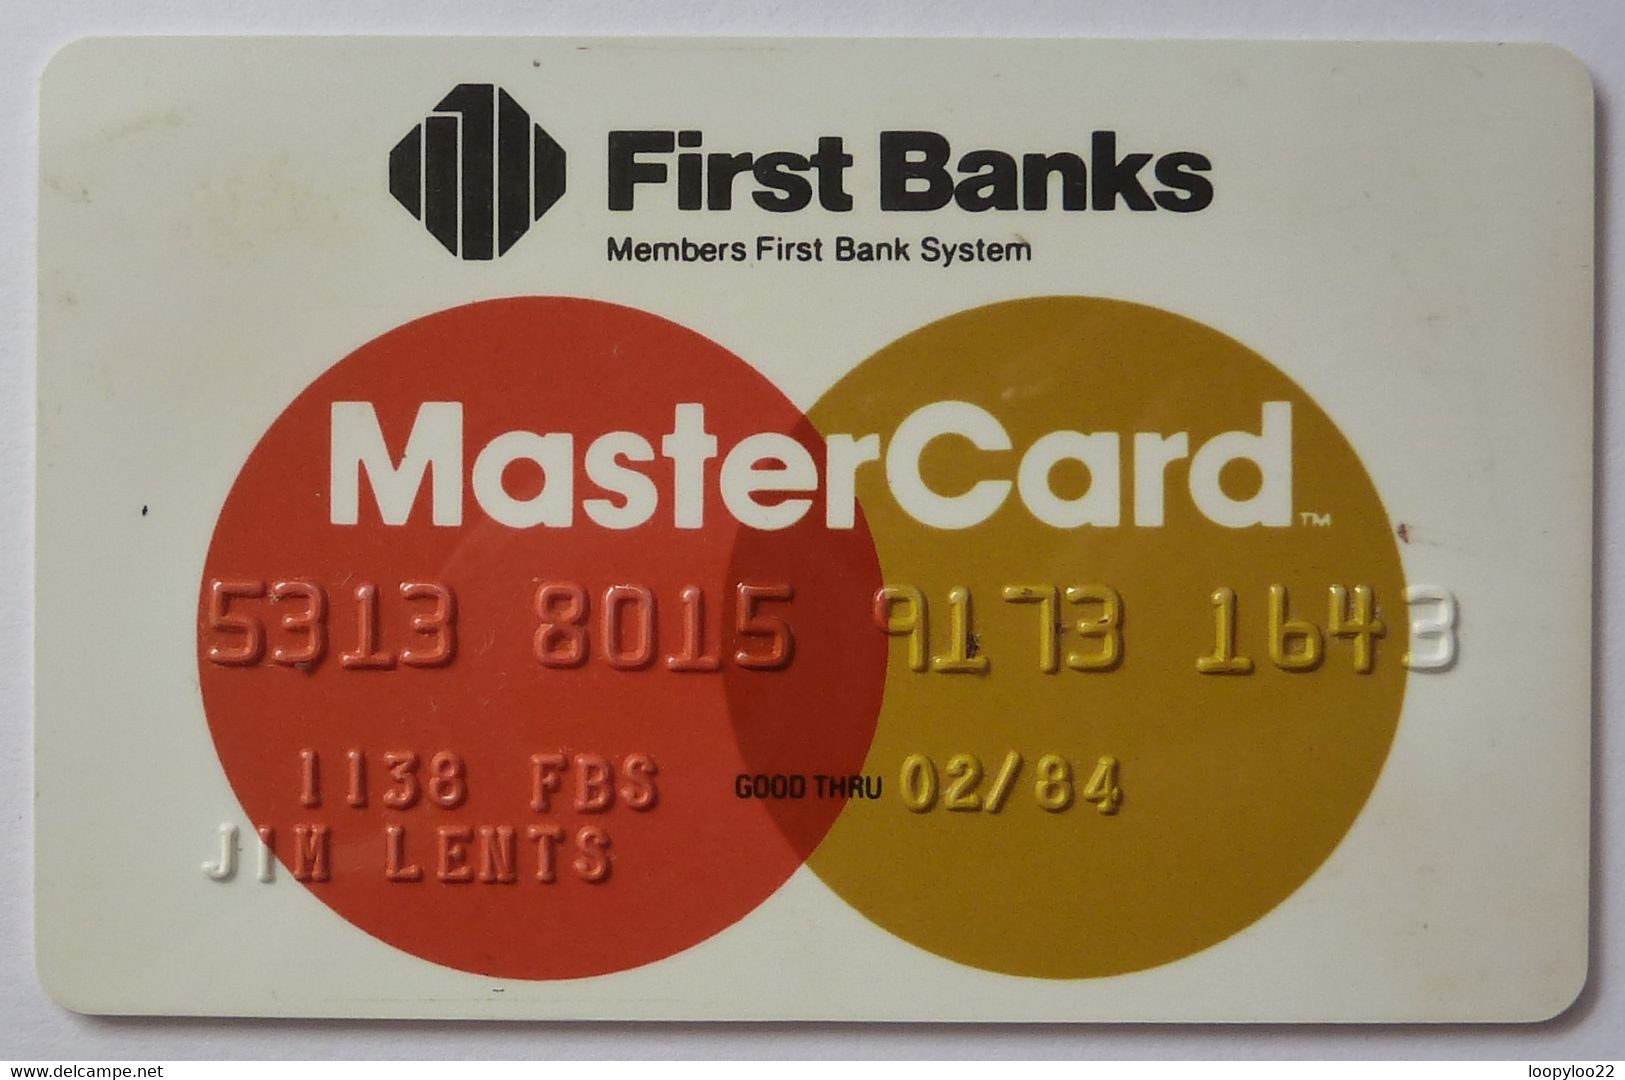 USA - Credit Card - MasterCard - First Banks - Exp 02/84 - Used - Credit Cards (Exp. Date Min. 10 Years)